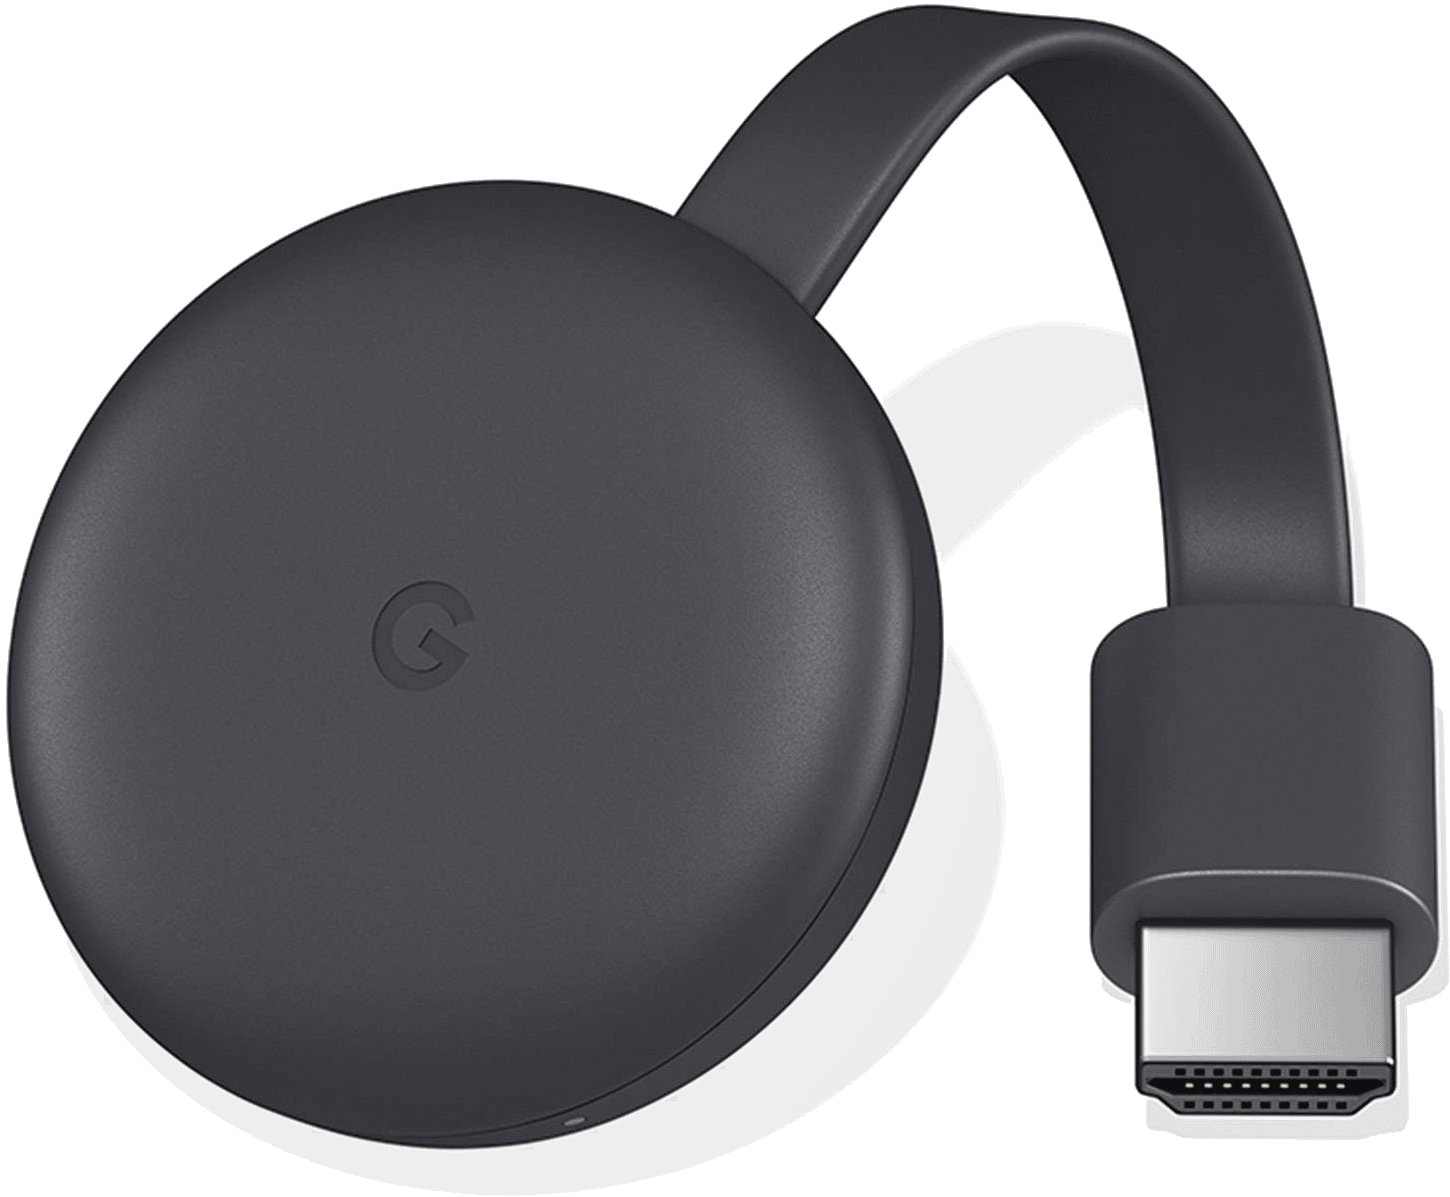 ChromeCast device. A small, black, disk with the Google logo and an hdmi connector. Used in Enseo's Nevaya Cast solution.